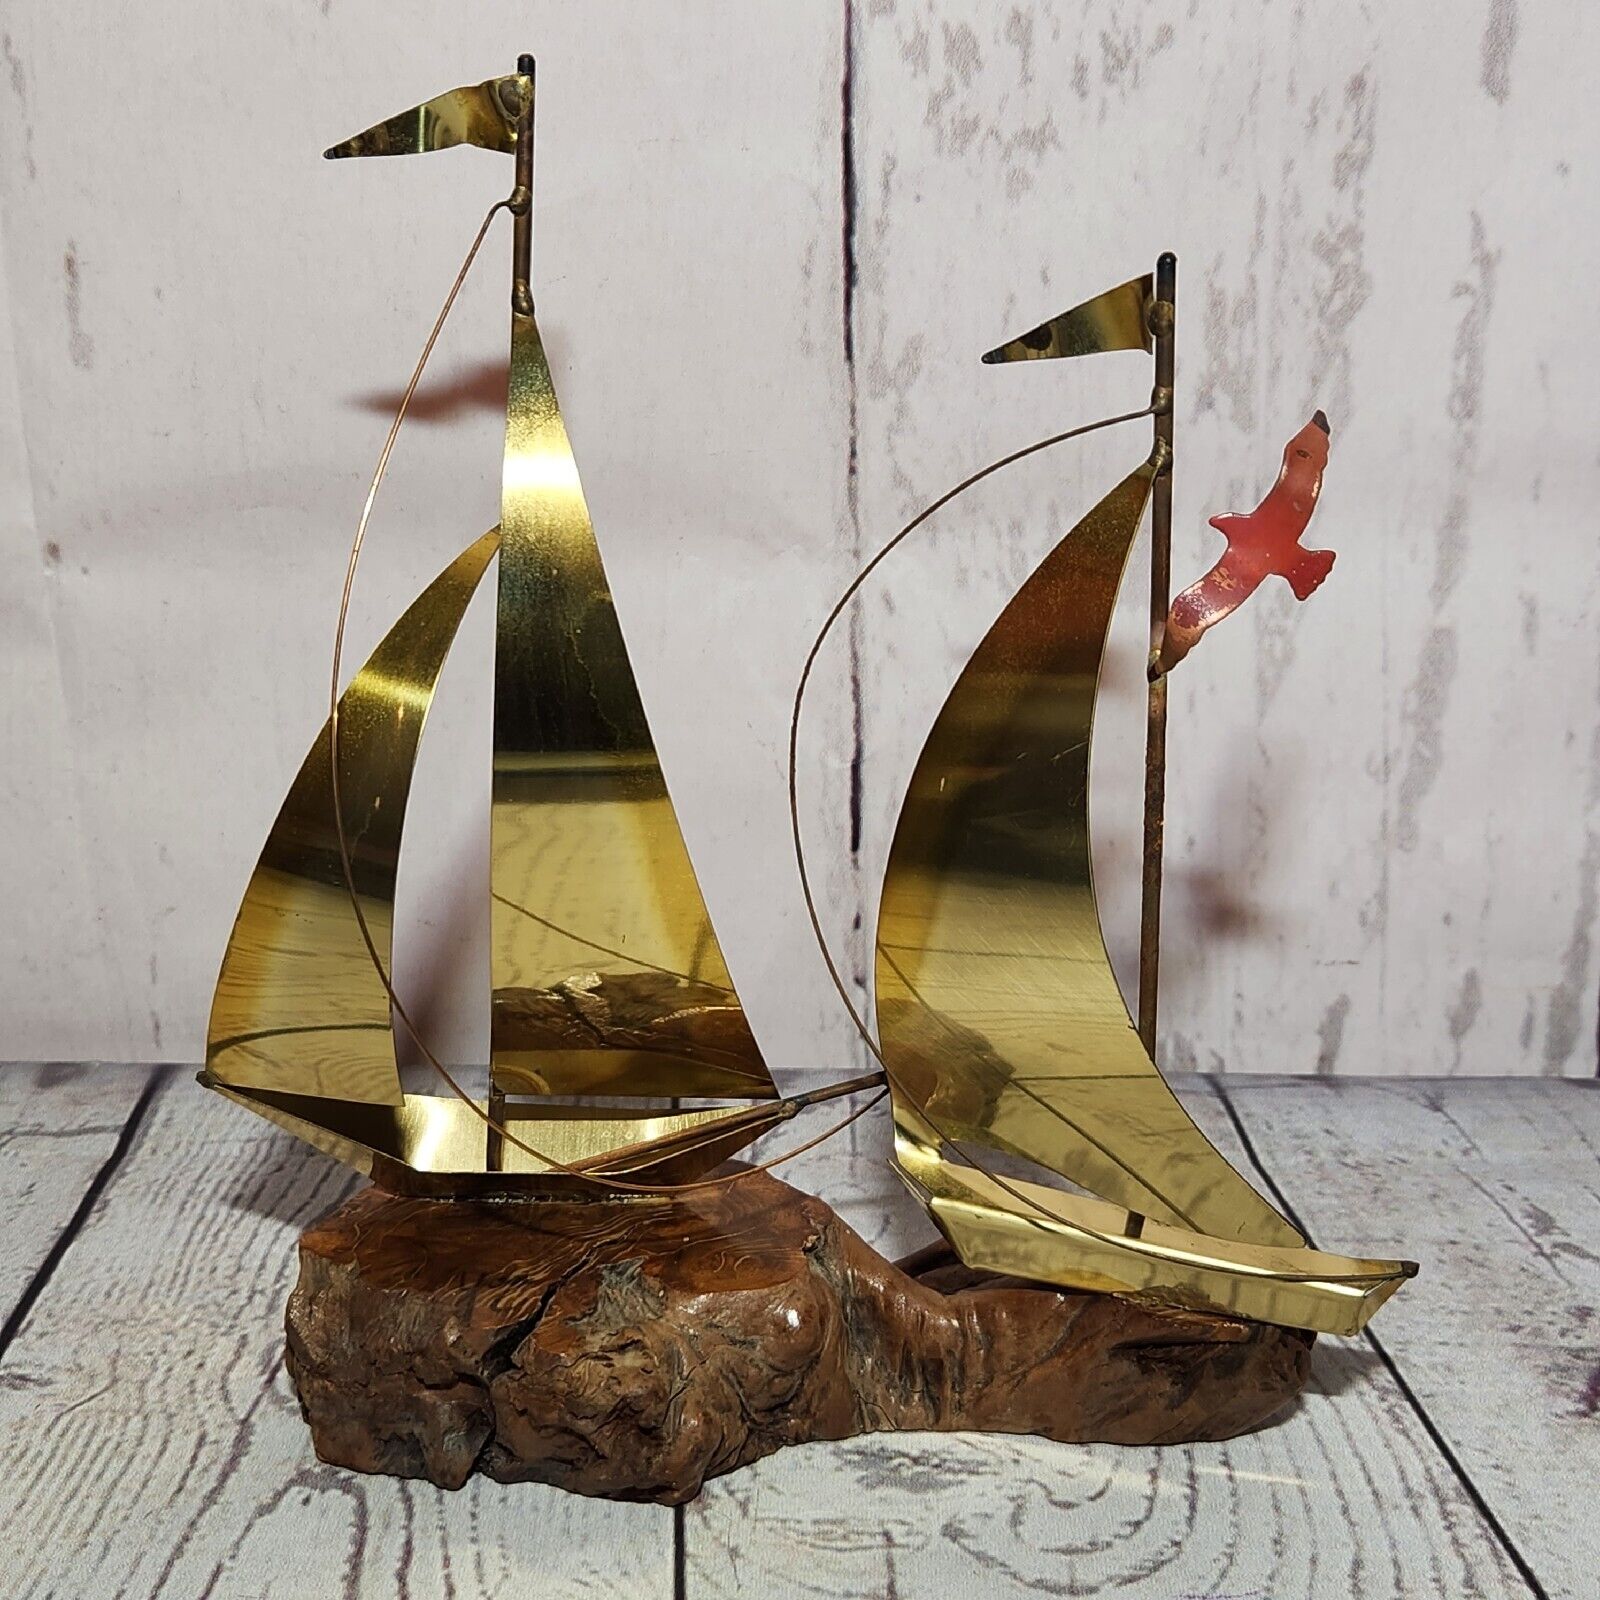 Vintage Pair of Brass Sailboat Sculptures on Solid Wood Base Nautical Home Decor